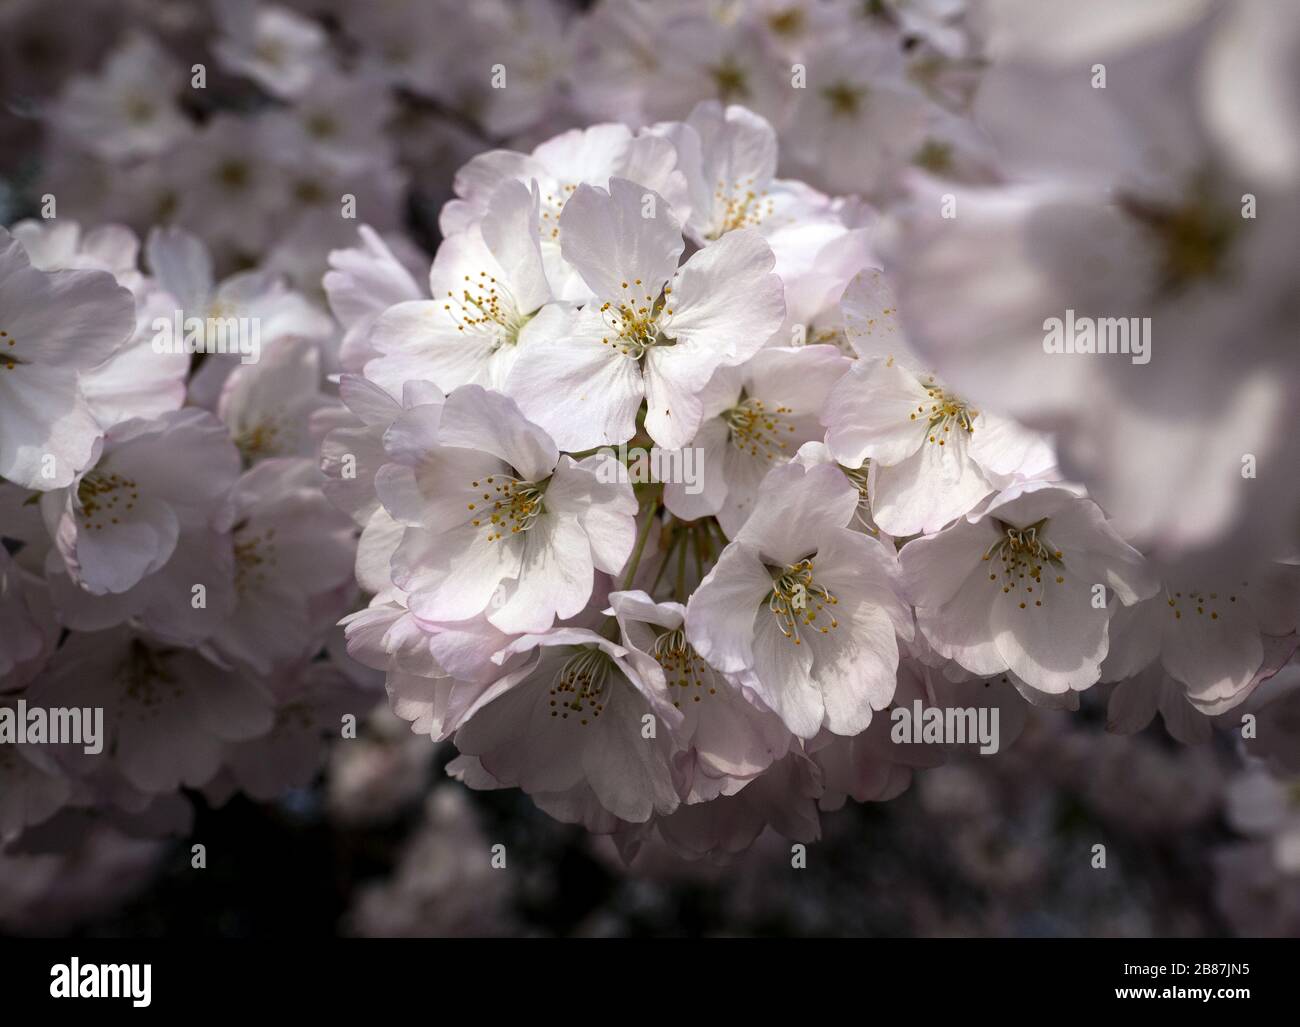 Washington, United States. 20th Mar, 2020. Cherry blossoms bloom in Washington D.C on March 20, 2020. The National Park Service has encouraged people to stay away from the annual blossoms to help stop the spread of the COVID-19, coronavirus, pandemic. Photo by Kevin Dietsch/UPI Credit: UPI/Alamy Live News Stock Photo